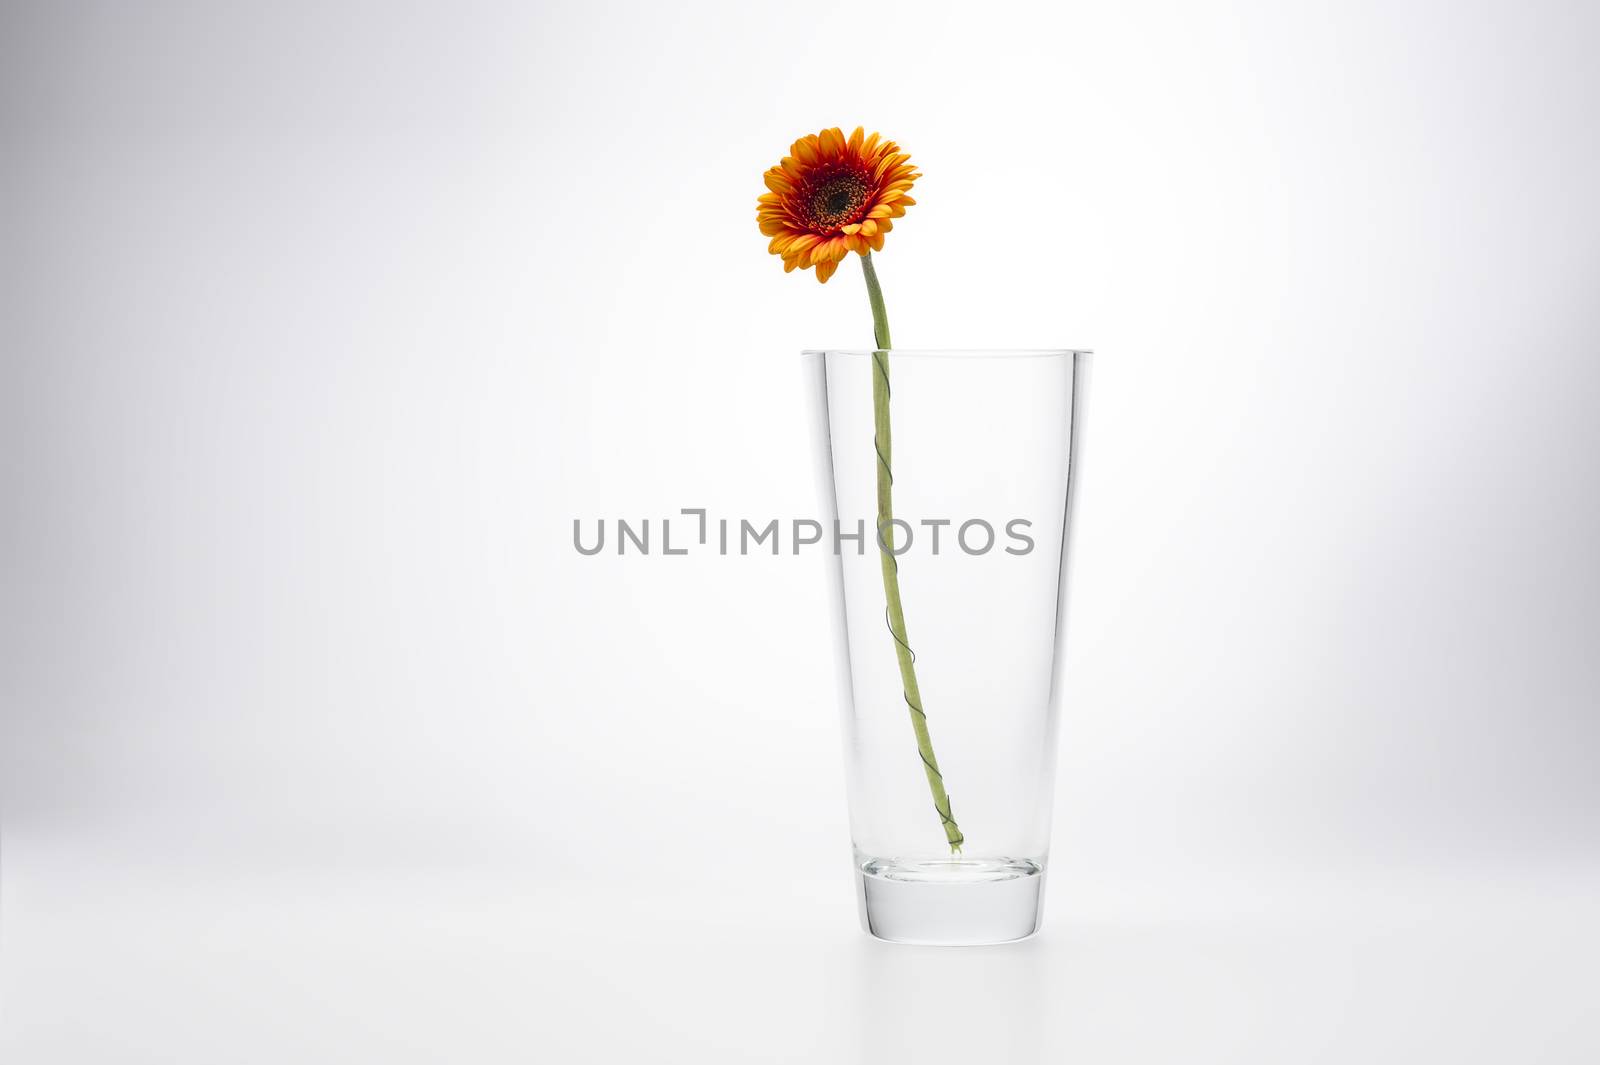 Yellow Gerbera Daisy, Barberton Daisy or African Daisy, in a stylish glass vase for a simple minimalist interior decoration, on a white studio background with copyspace